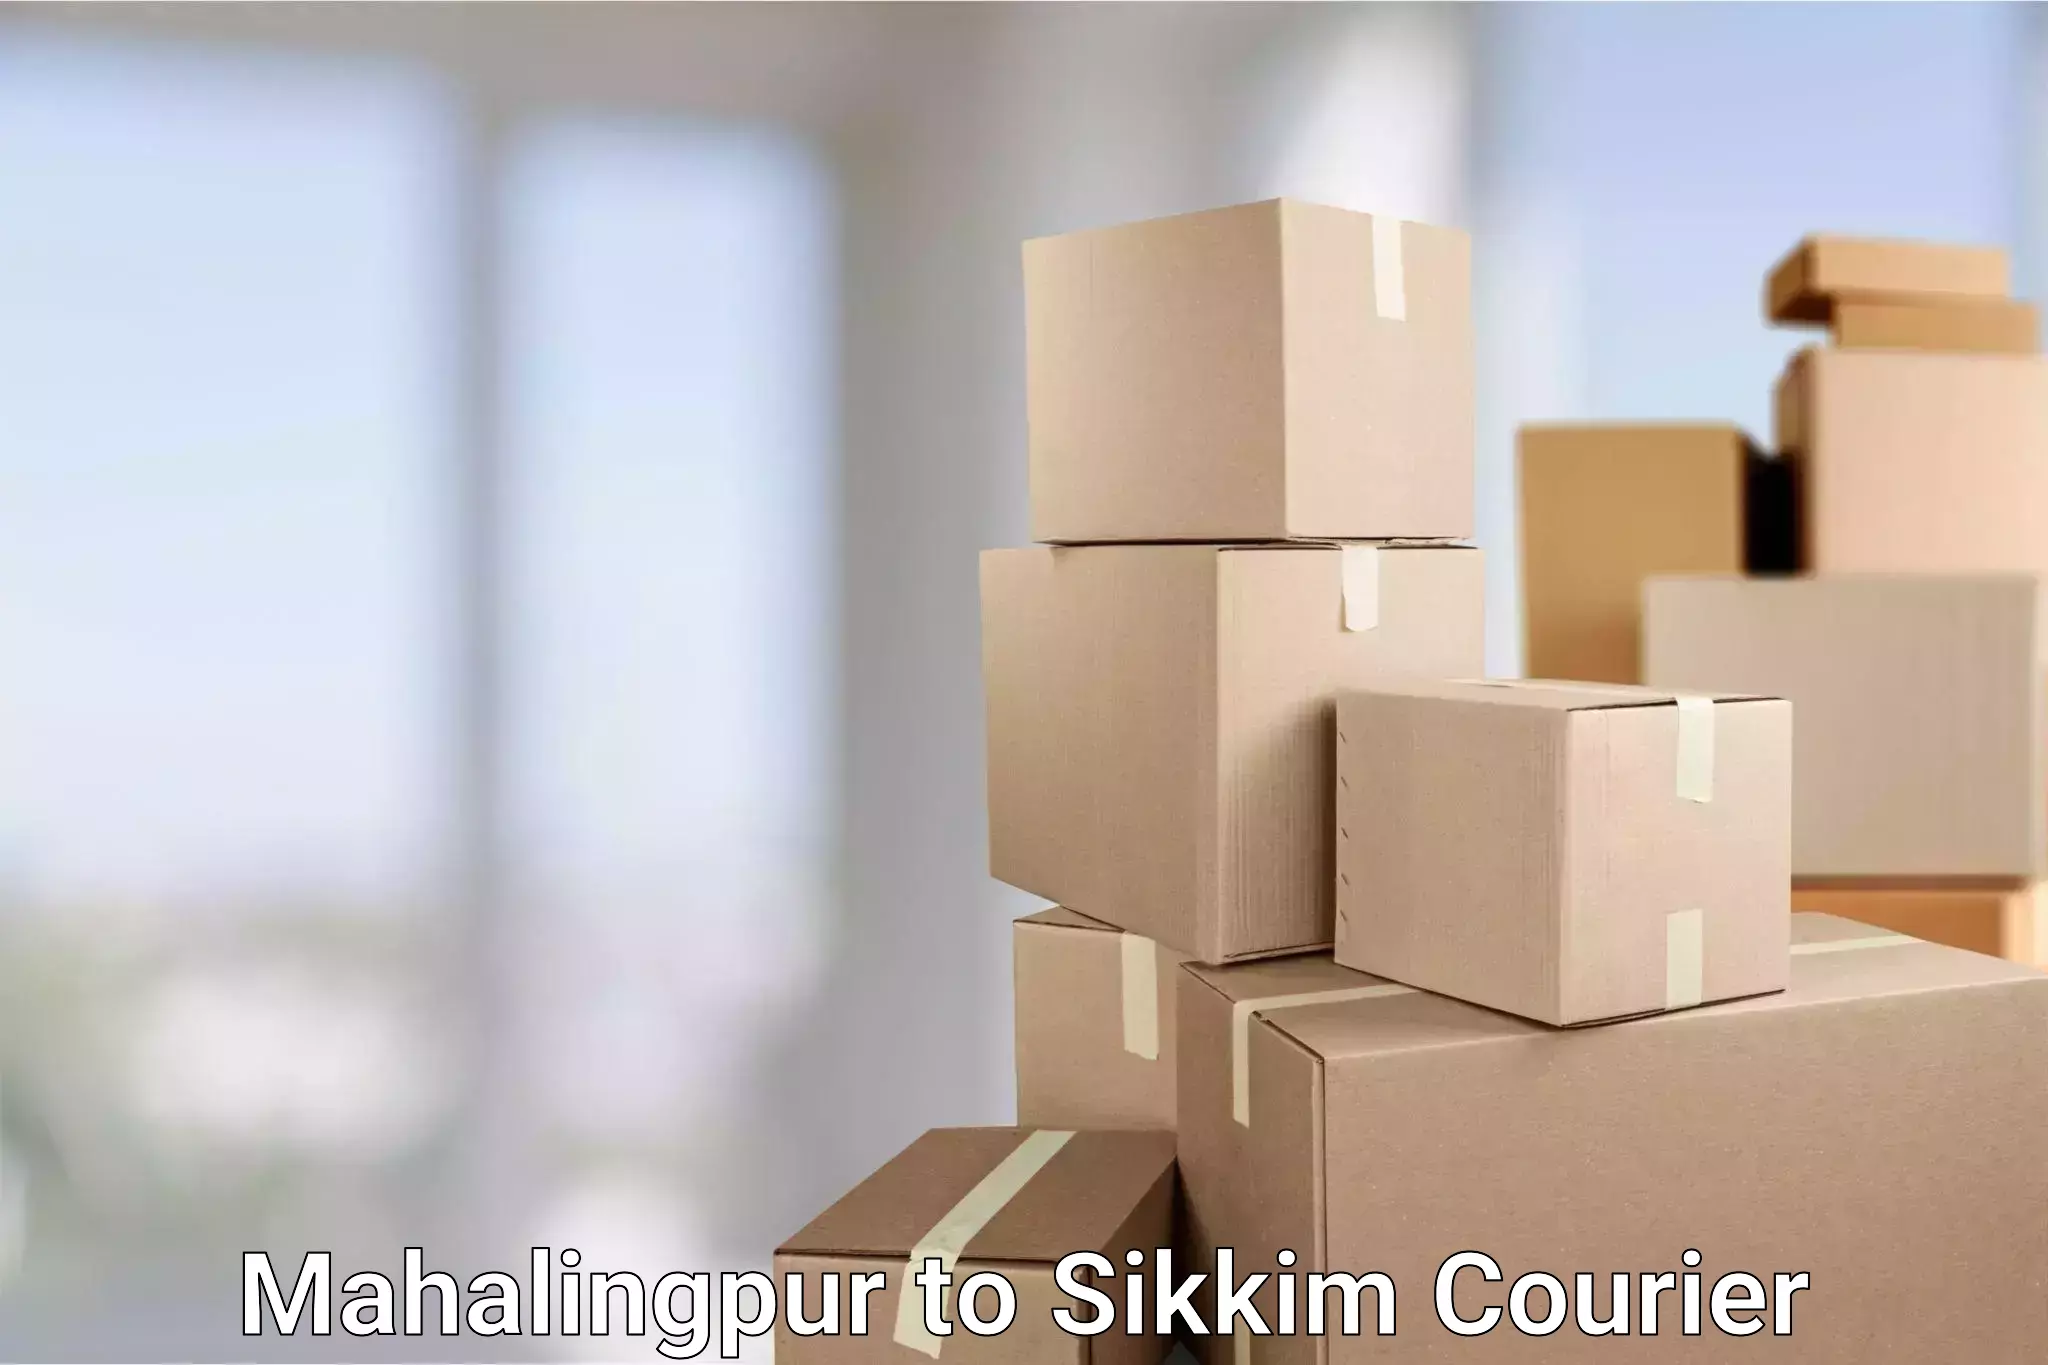 Speedy delivery service Mahalingpur to Sikkim